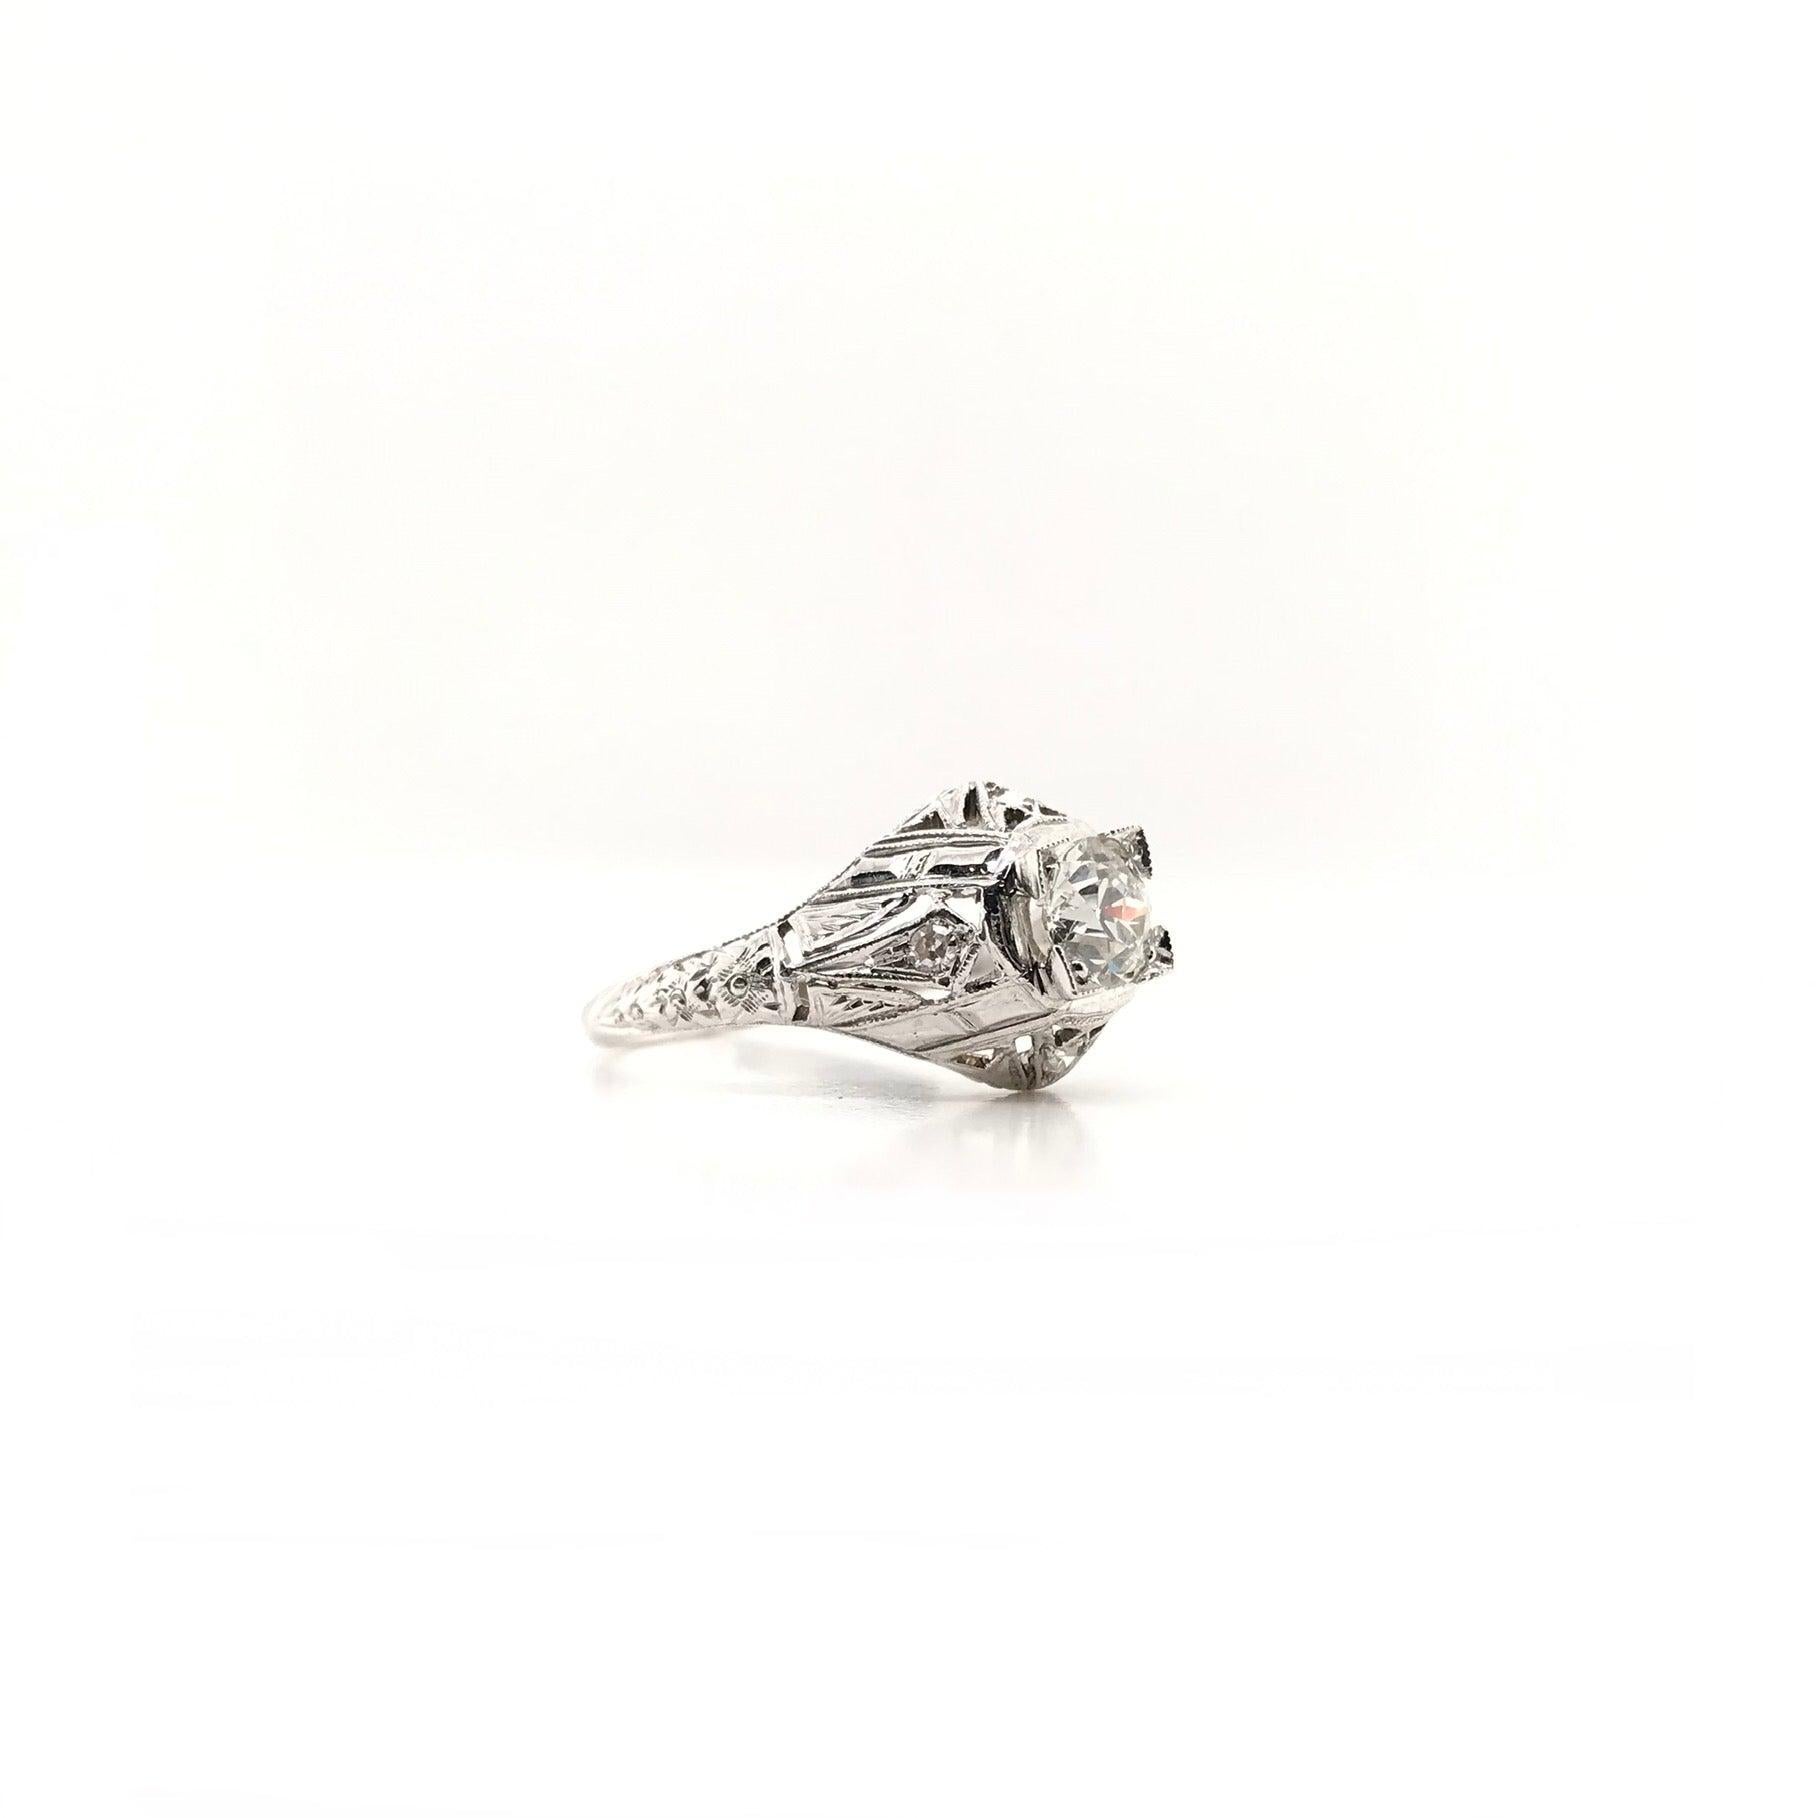 This stunning antique piece was skillfully handcrafted sometime during the Art Deco design period (1920-1940). The platinum setting is absolutely exemplary of it’s design period; featuring a complex structural motif, clever filigree, clean lines,